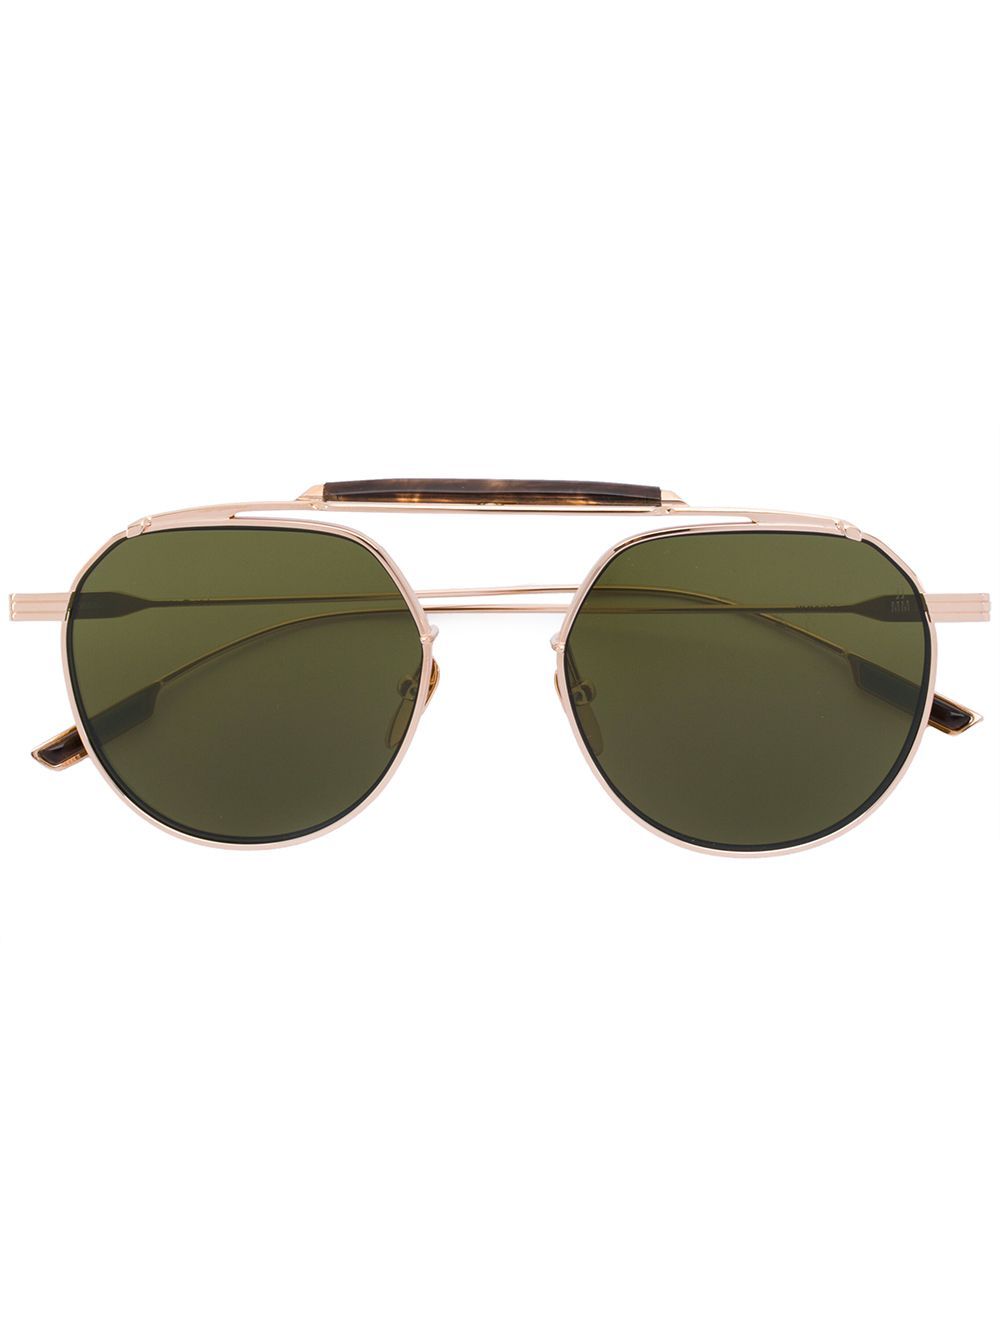 Jacques Marie Mage round frame sunglasses - Metallic | FarFetch Global